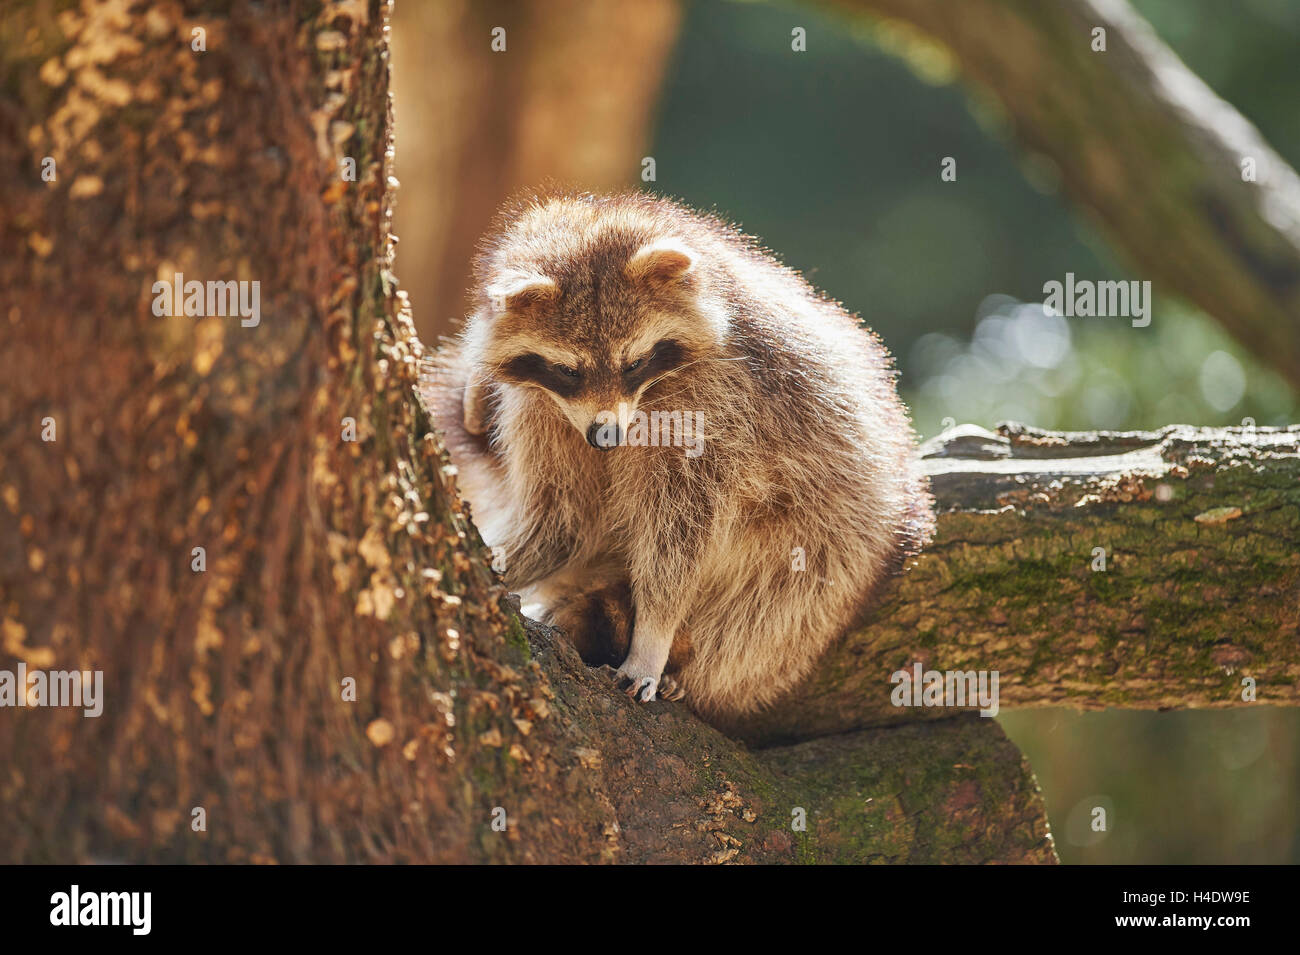 Racoon, Procyon lotor, wood, trunk, sidewhite, sit Stock Photo